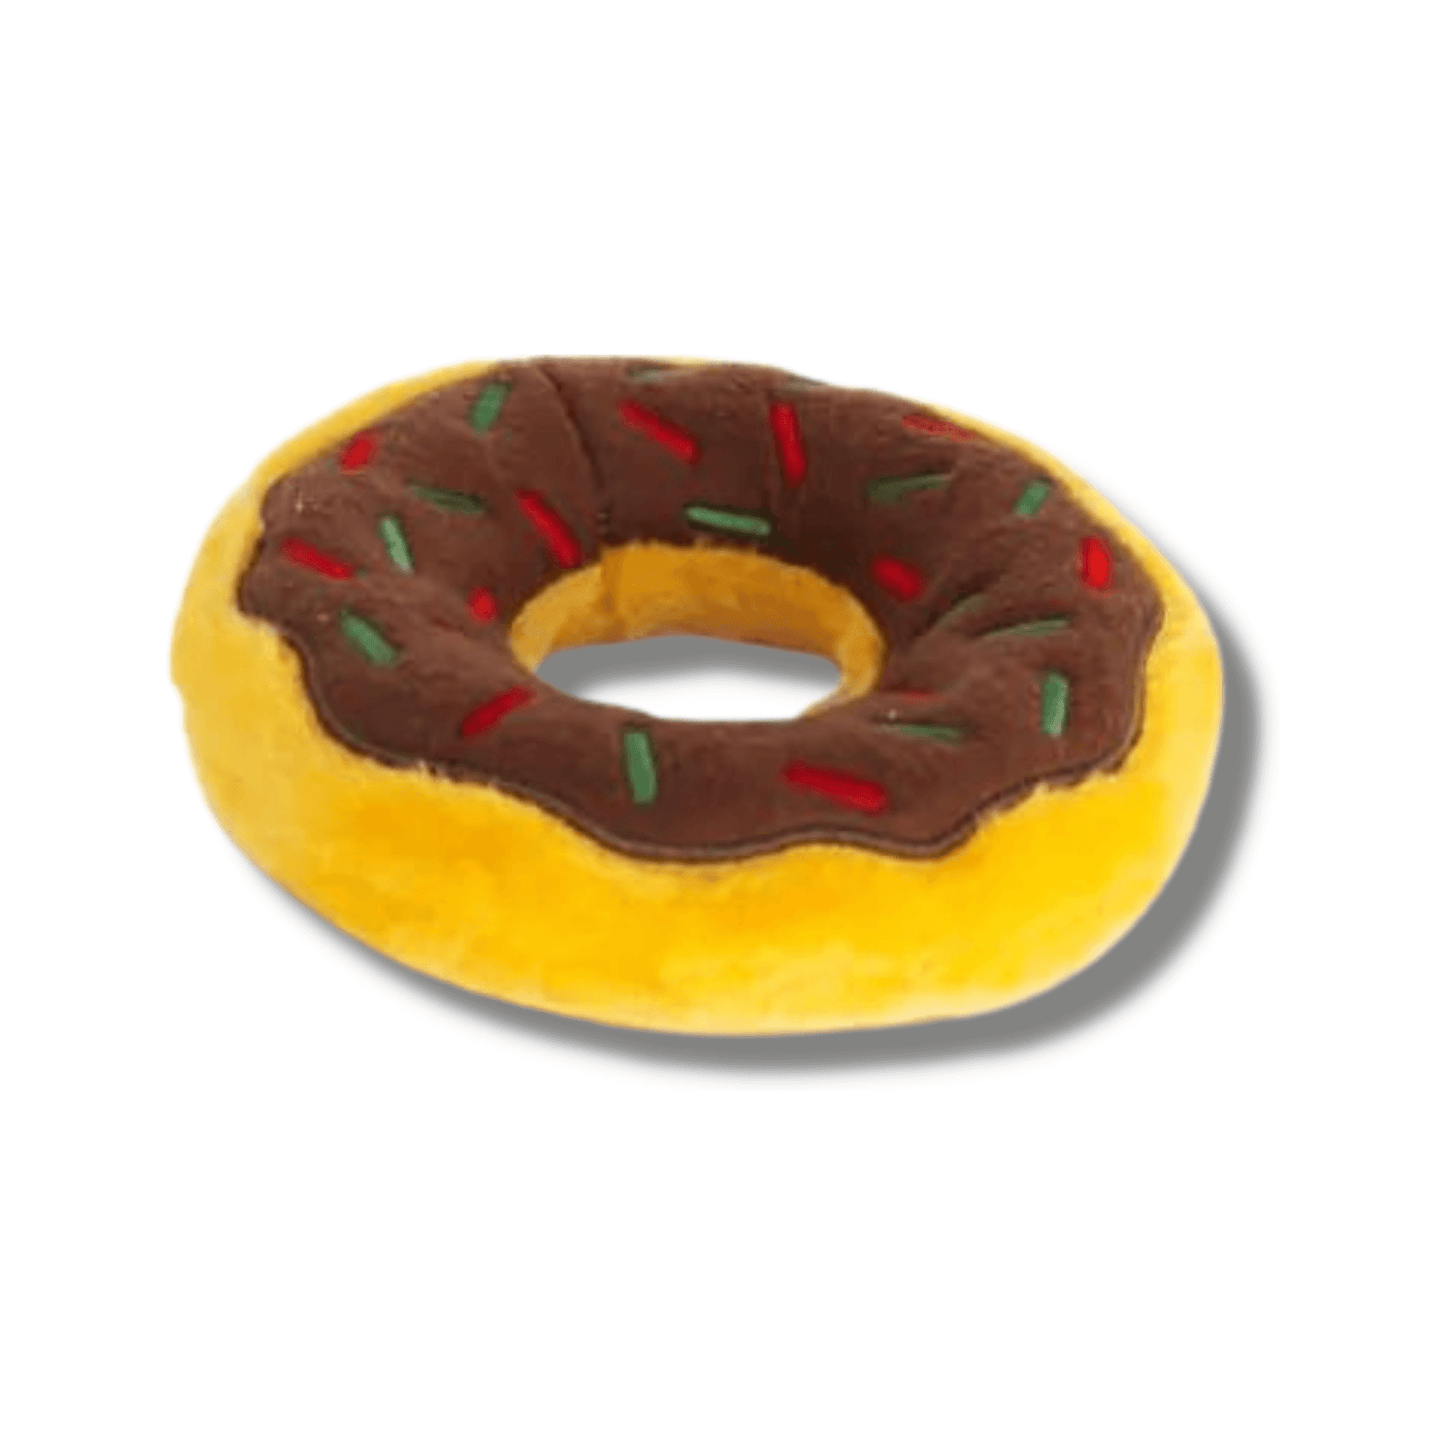 Donut gingerbread dog toy, let's pawty 